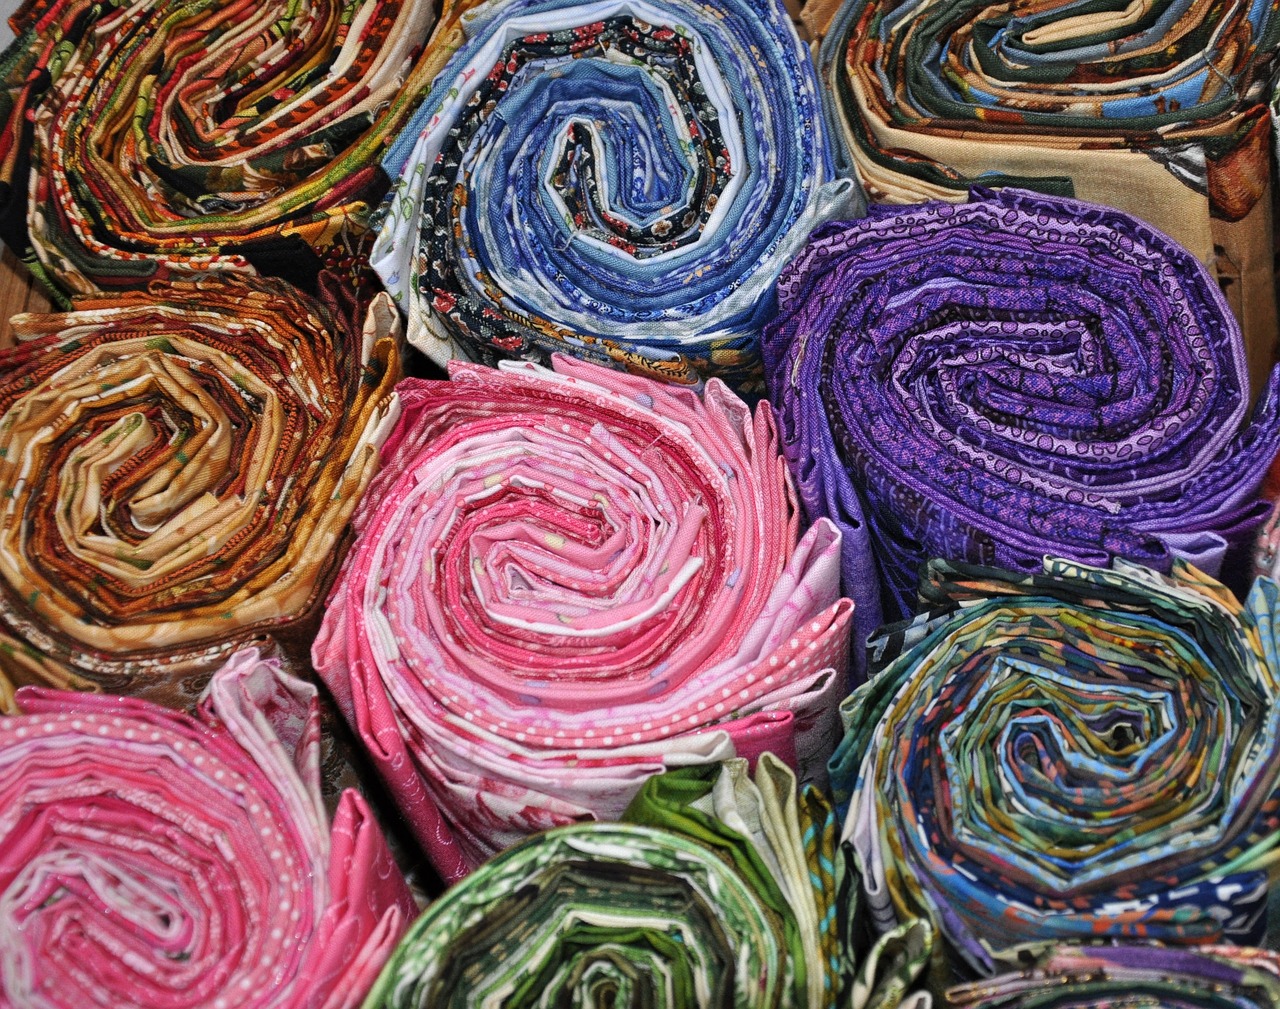 a box filled with lots of different colored fabric, flickr, spiral, legendary masterpiece, yukata clothing, ripped fabric